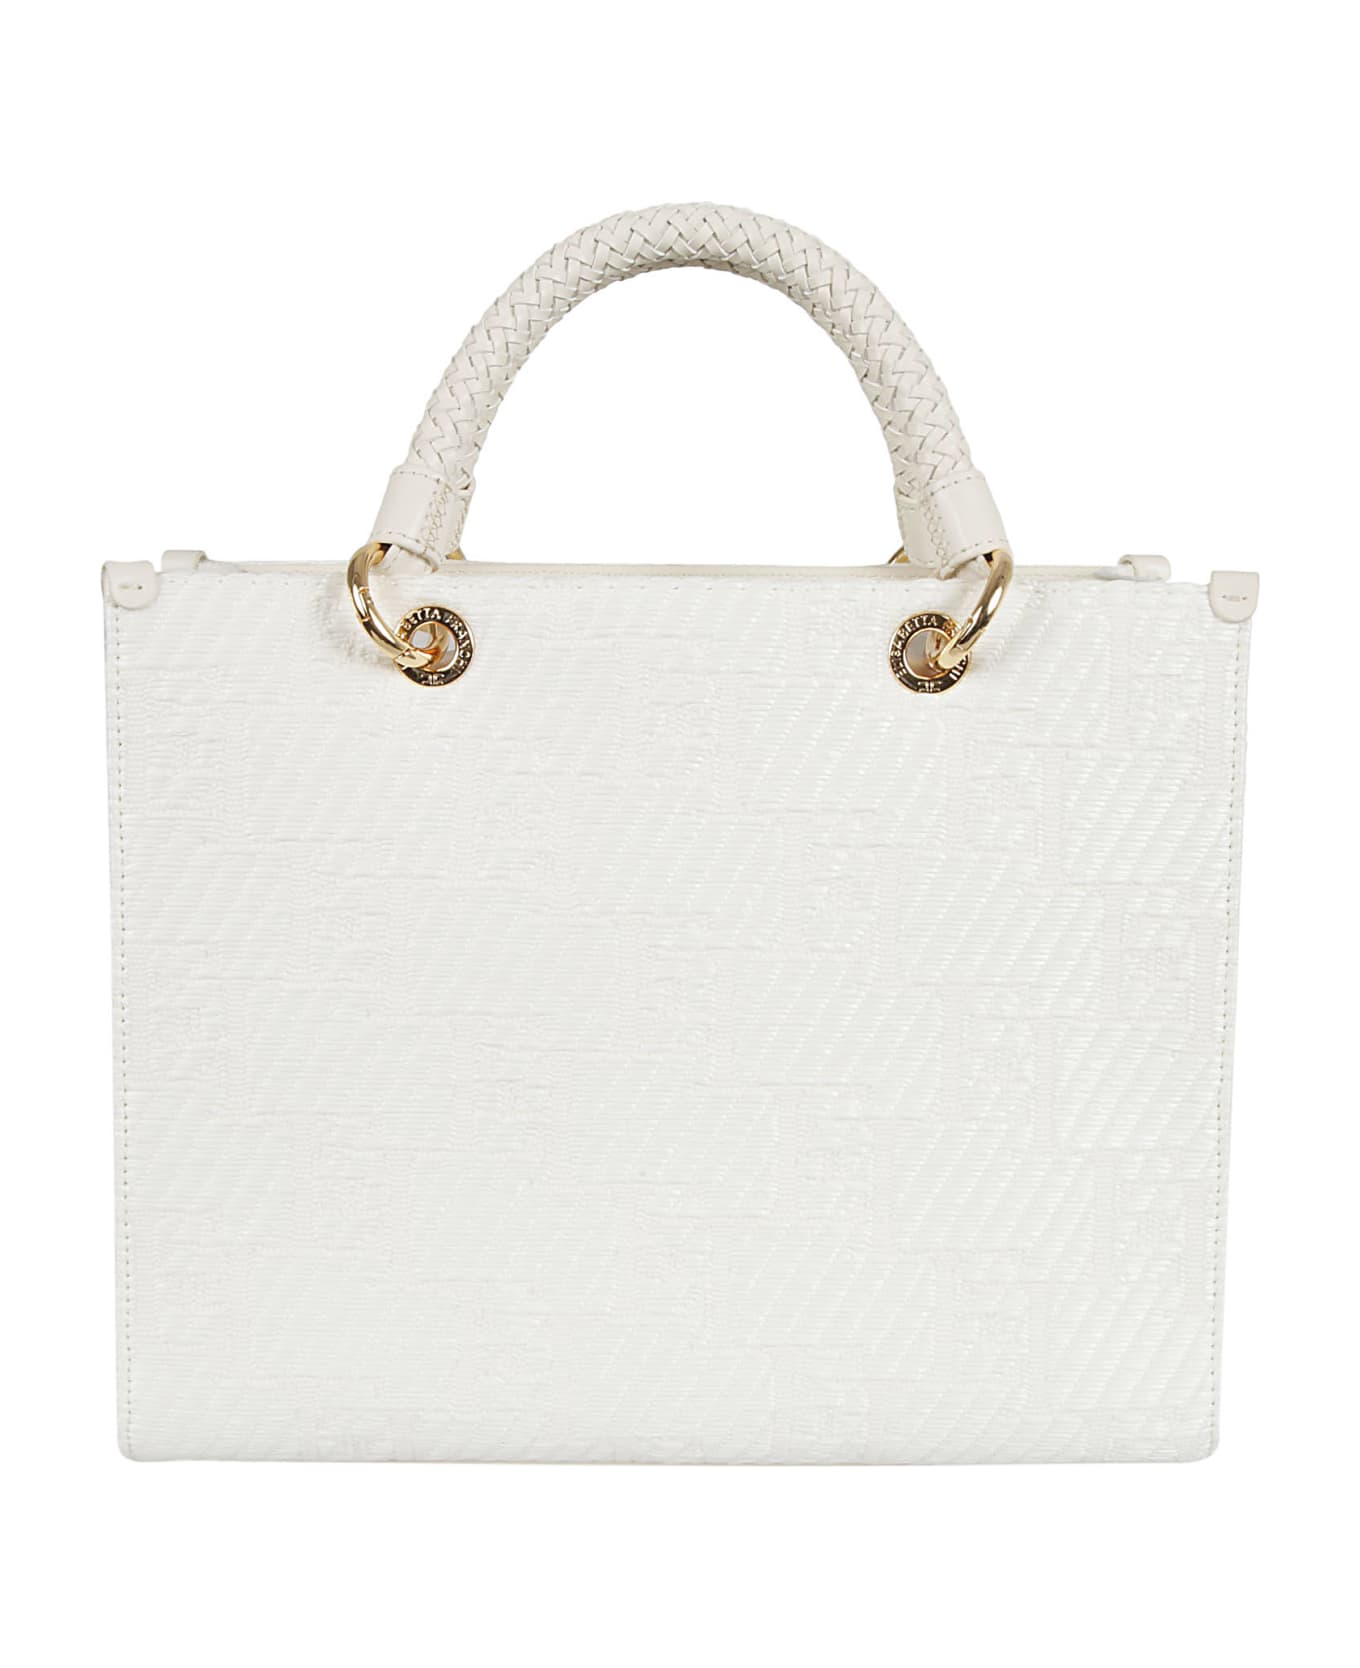 Elisabetta Franchi Woven Top Handle Patterned Tote - Avorio トートバッグ